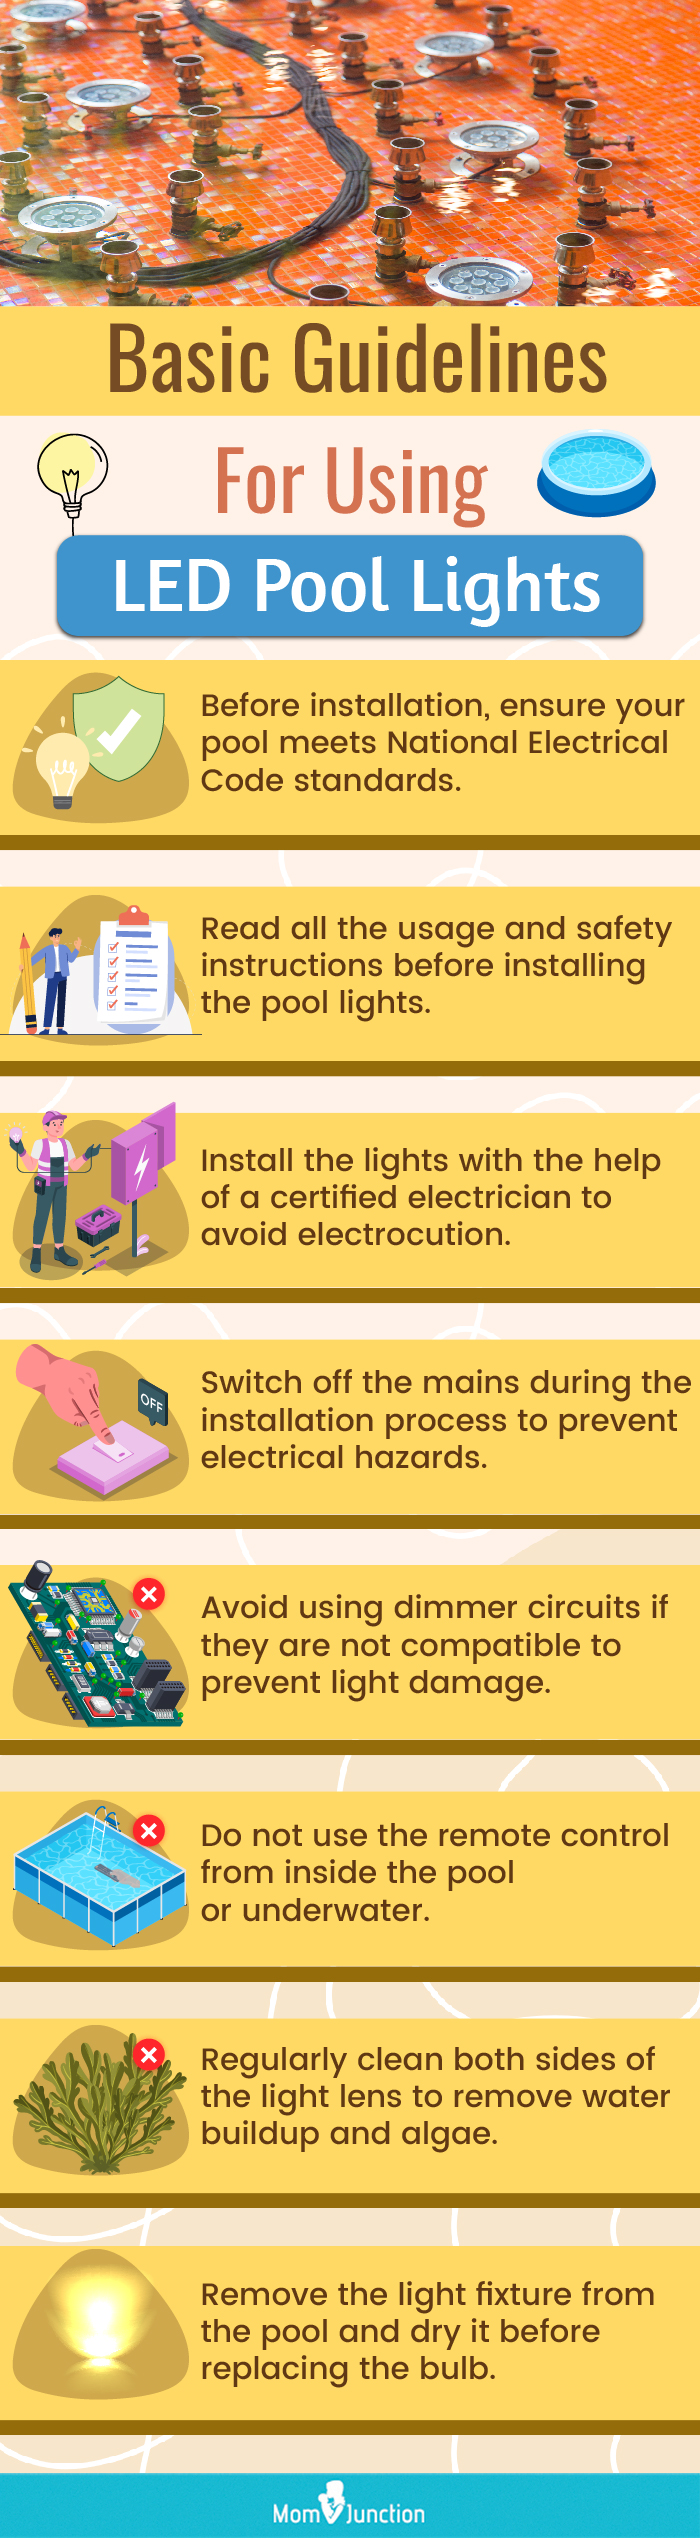 Basic Guidelines For Using LED Pool Lights (infographic)